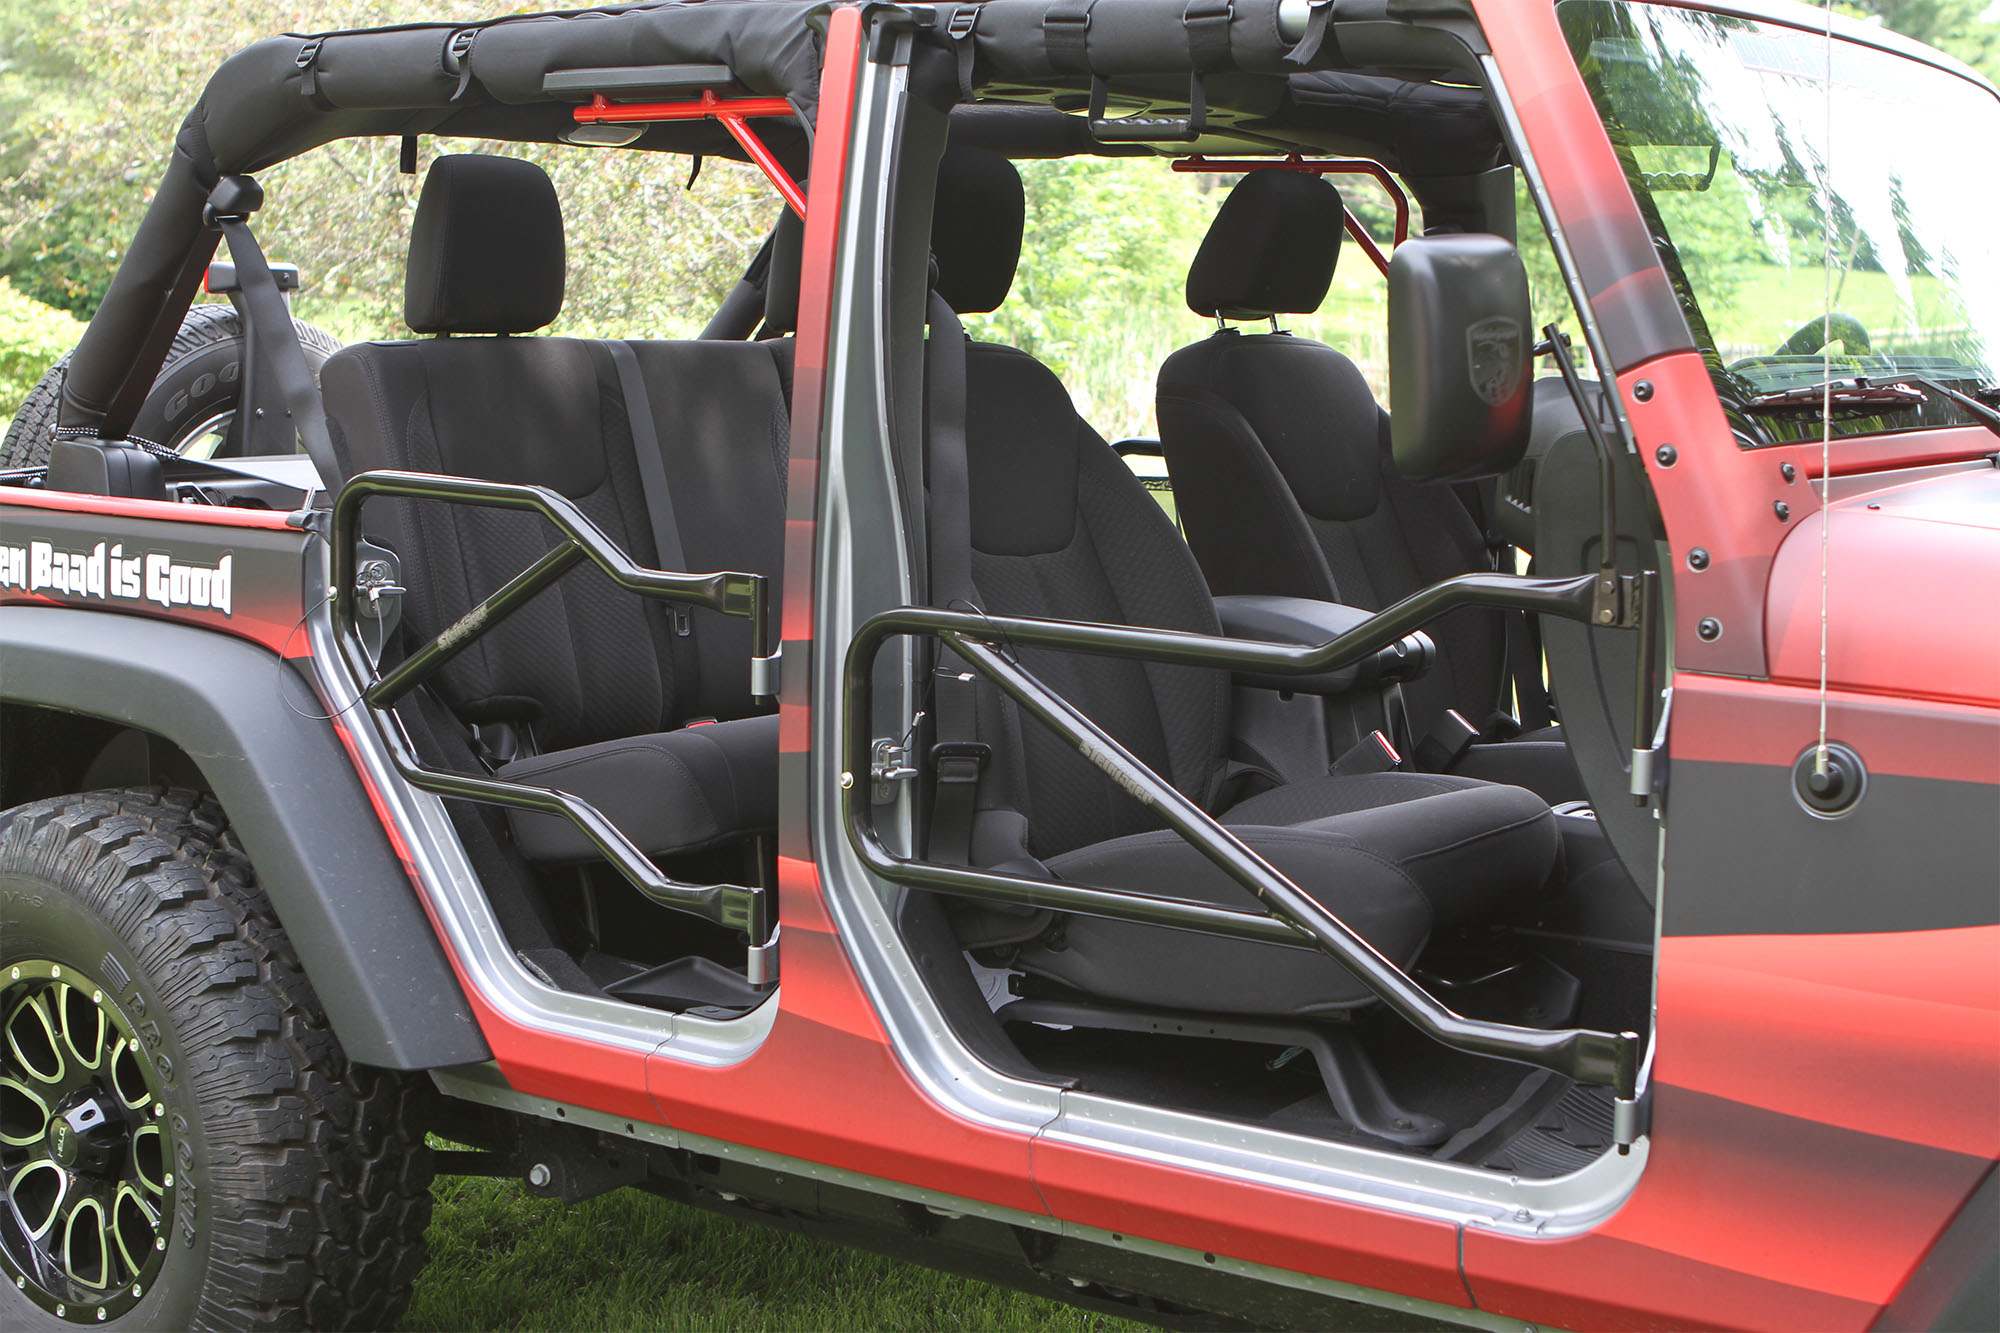 Jeep JK Wrangler Trail Door Kit Black with White Covers